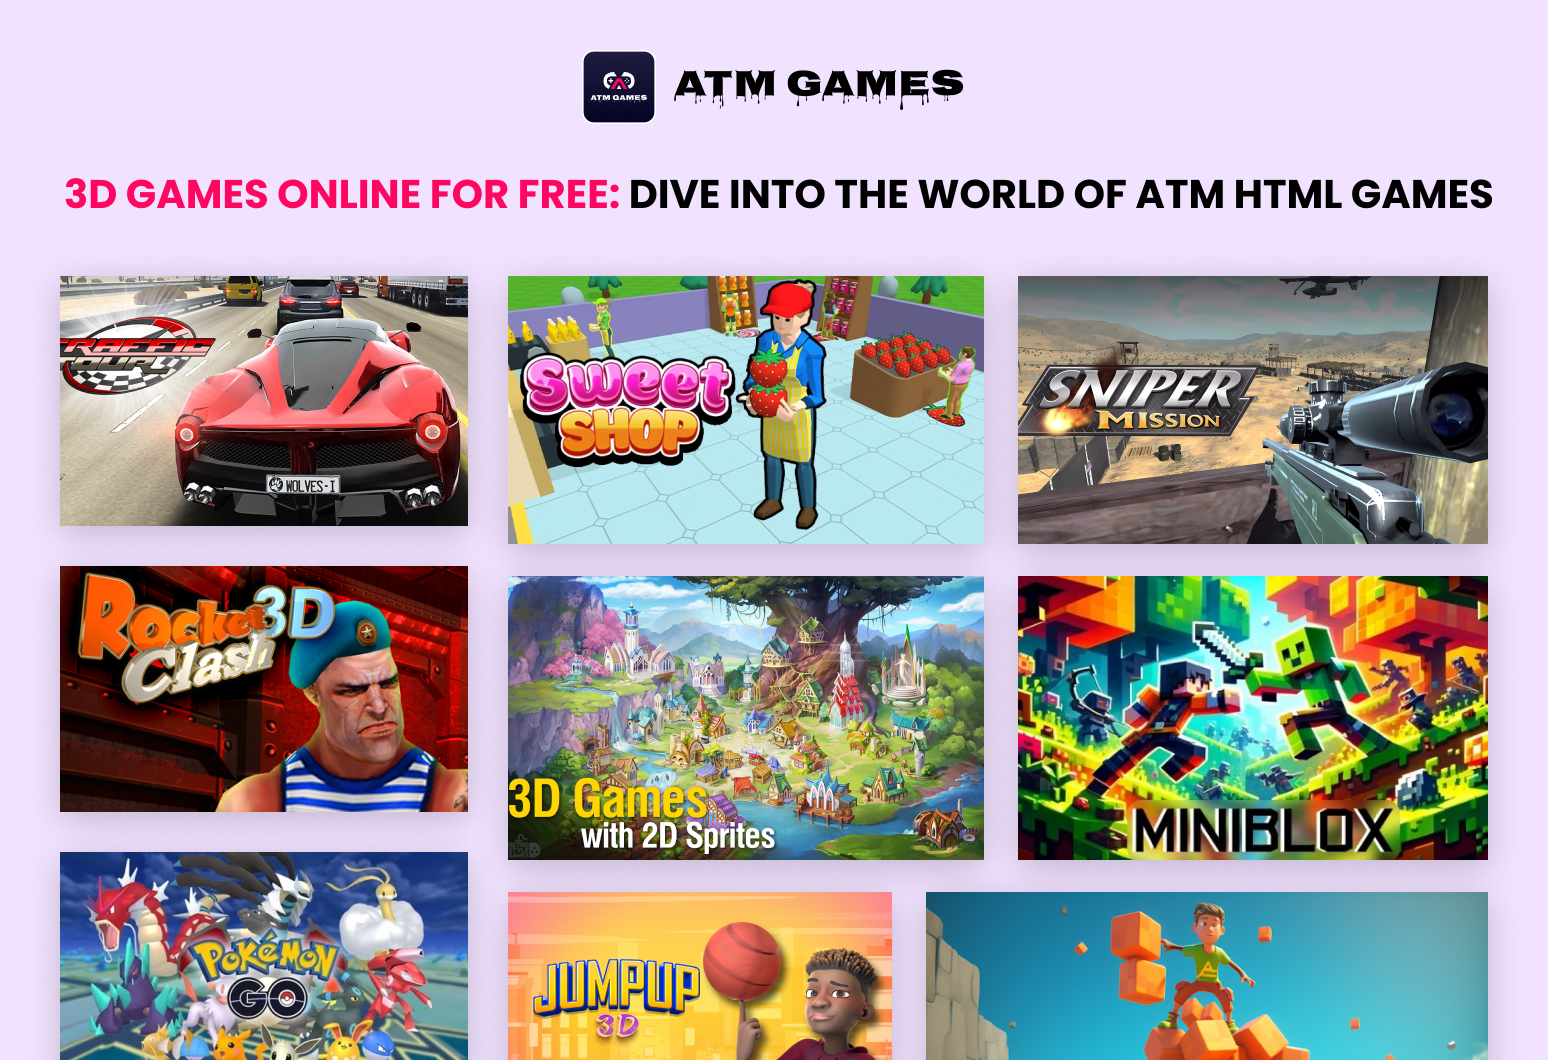 3D Games Online For Free: Dive Into the World of ATM HTML Games